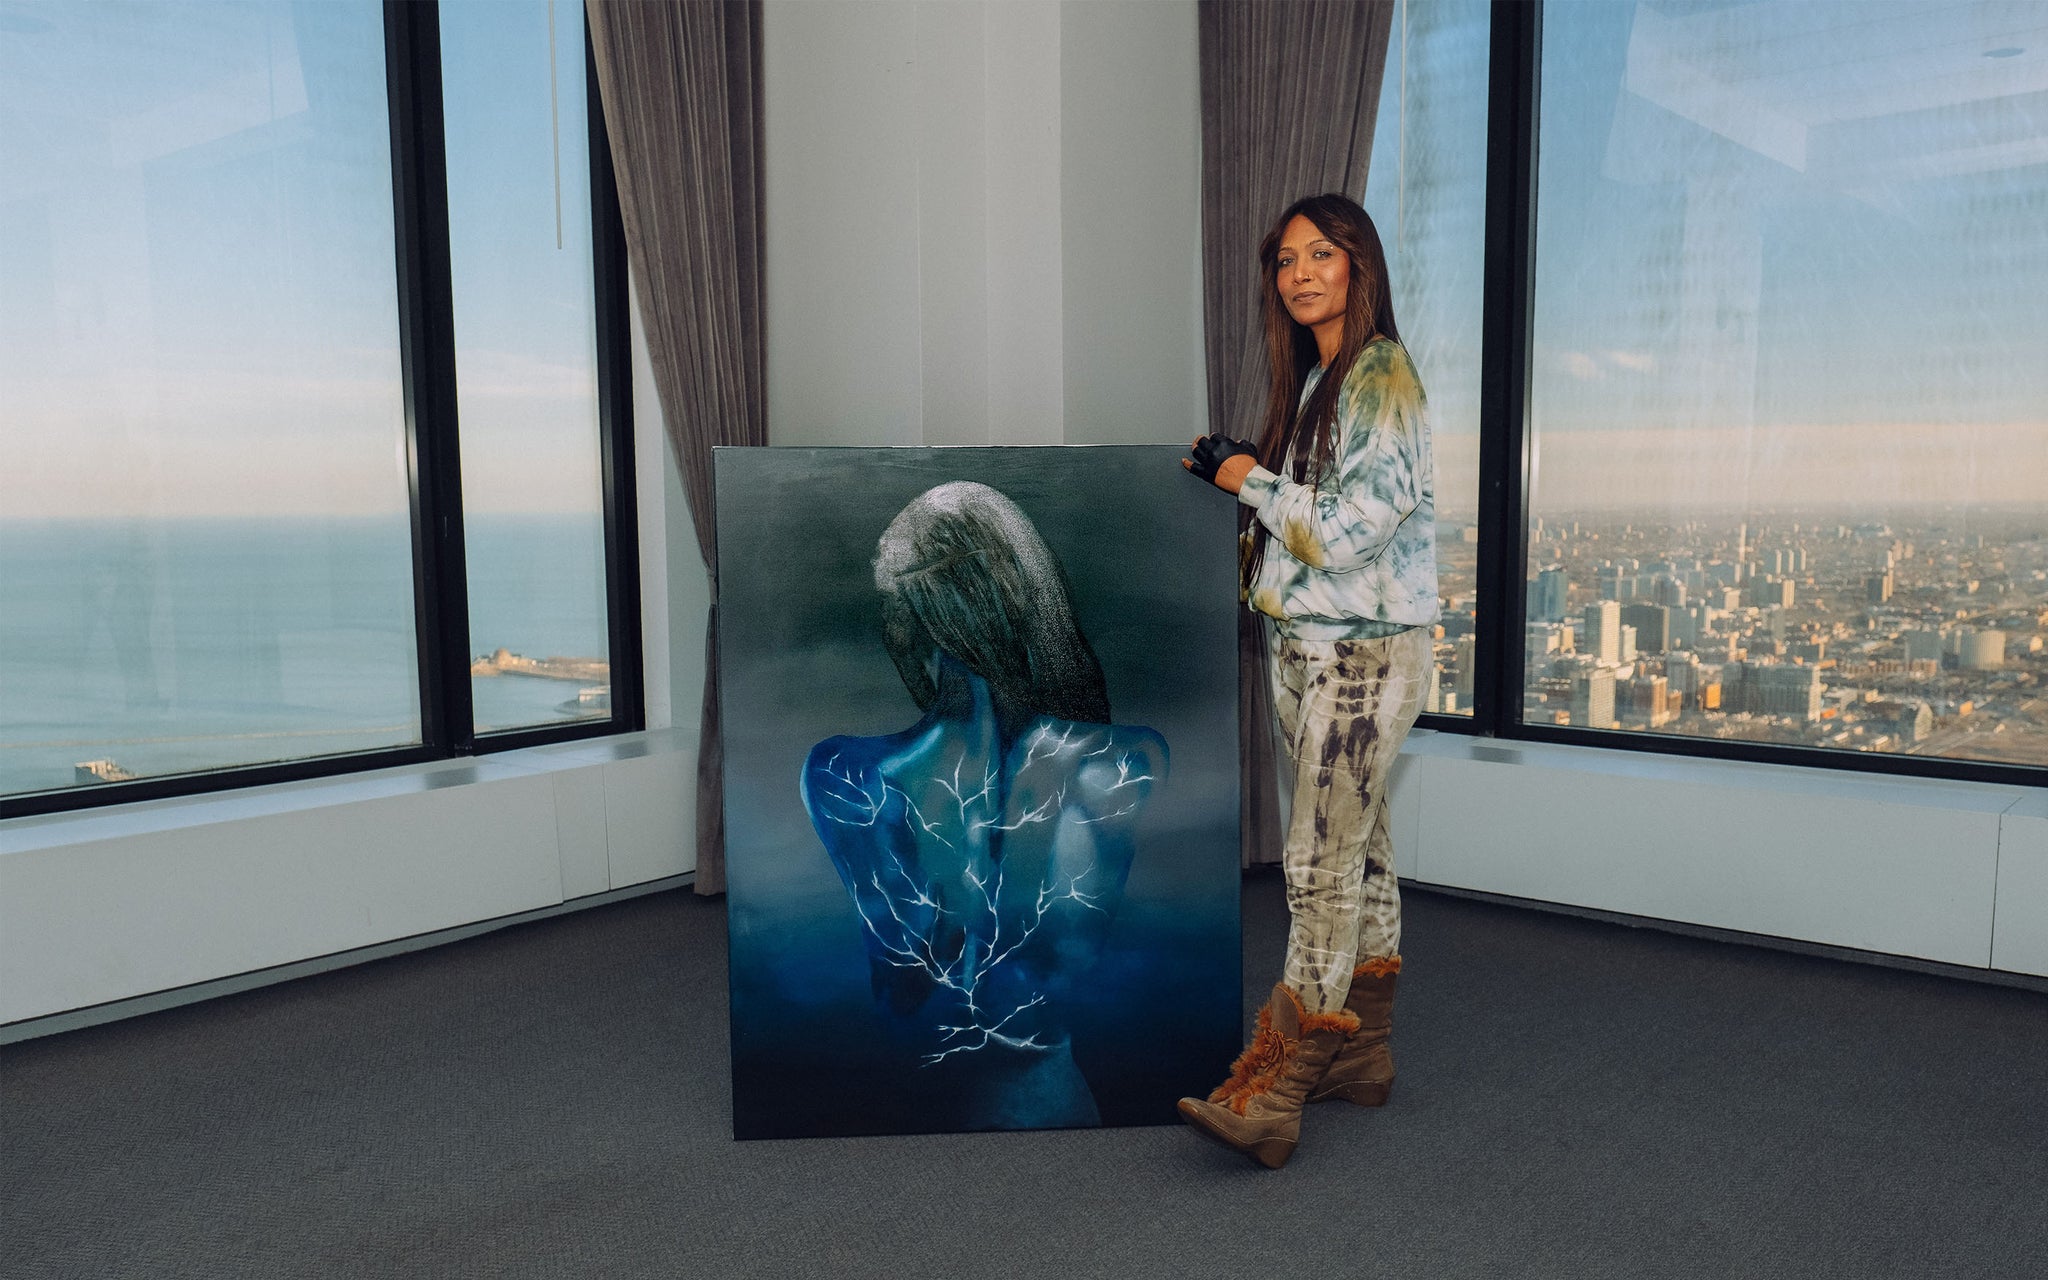 WILLIS TOWER MEMBERSHIP CLUB TEMPORARILY OPENS TO THE PUBLIC FOR EXHIBITION FEATURING Acclaimed artist Jenny Vyas